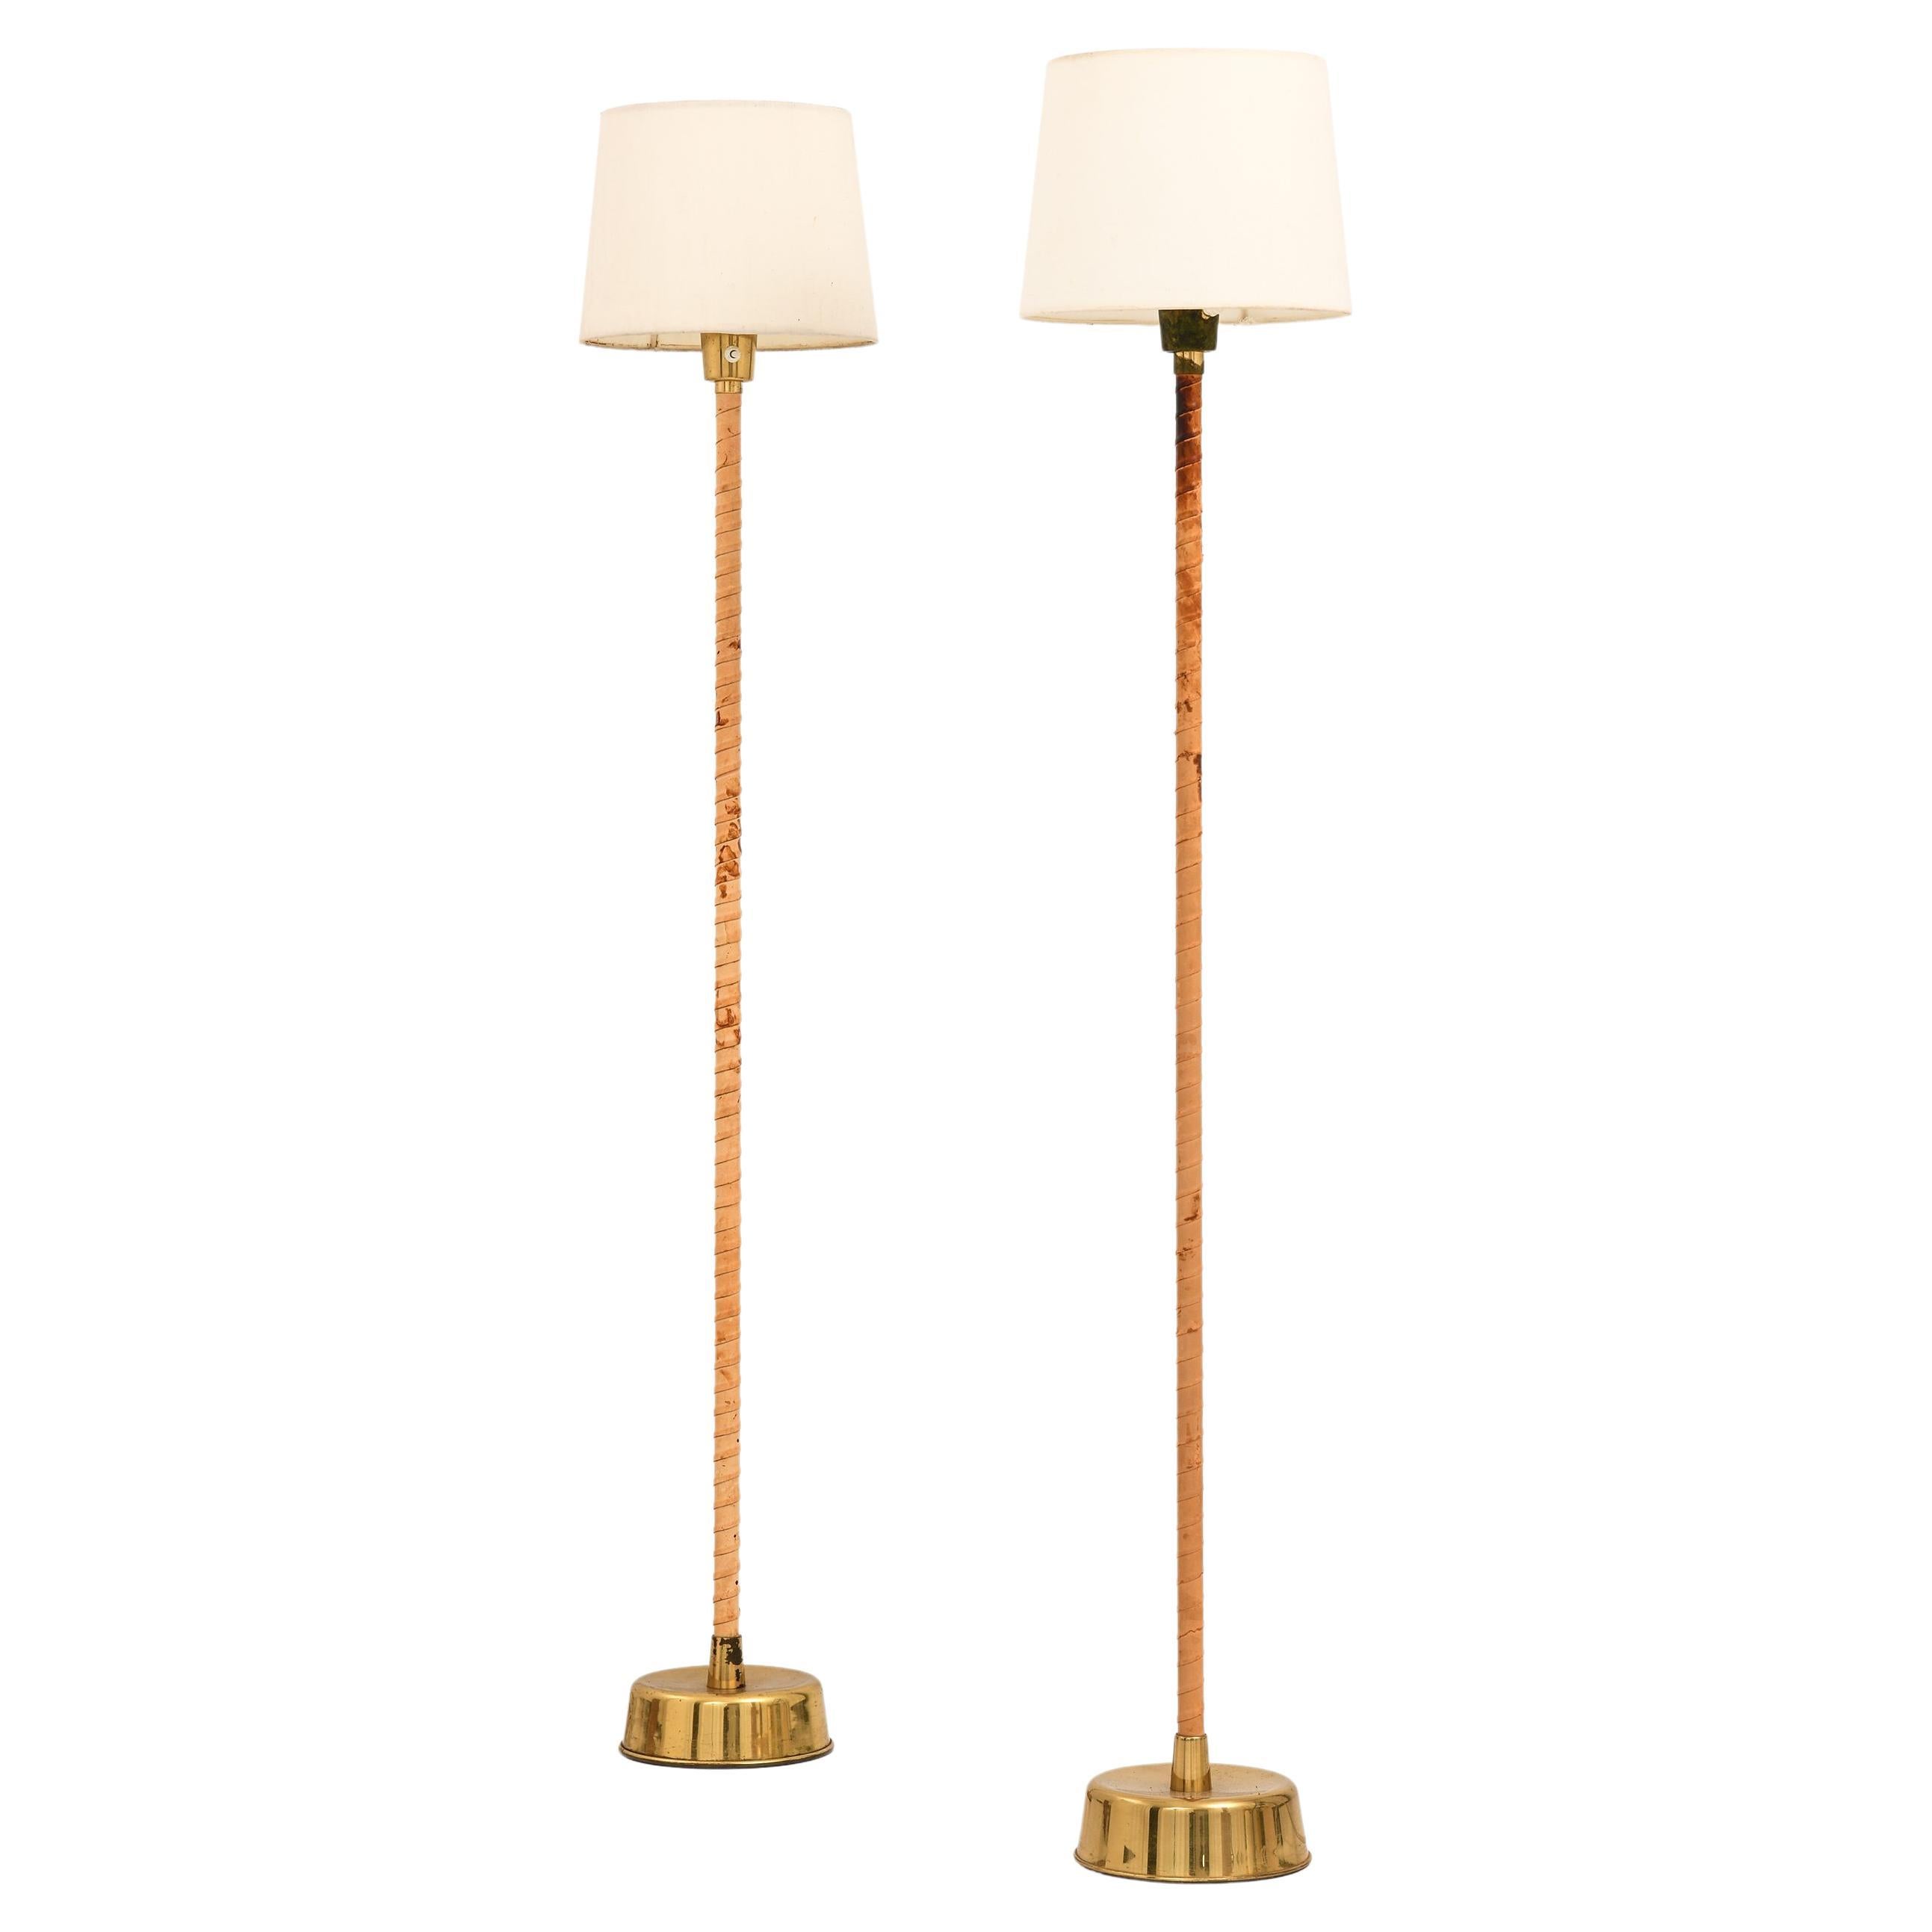 Floor Lamps in Leather, Brass and Lamp Shades by Lisa Johansson-Pape, 1950's For Sale